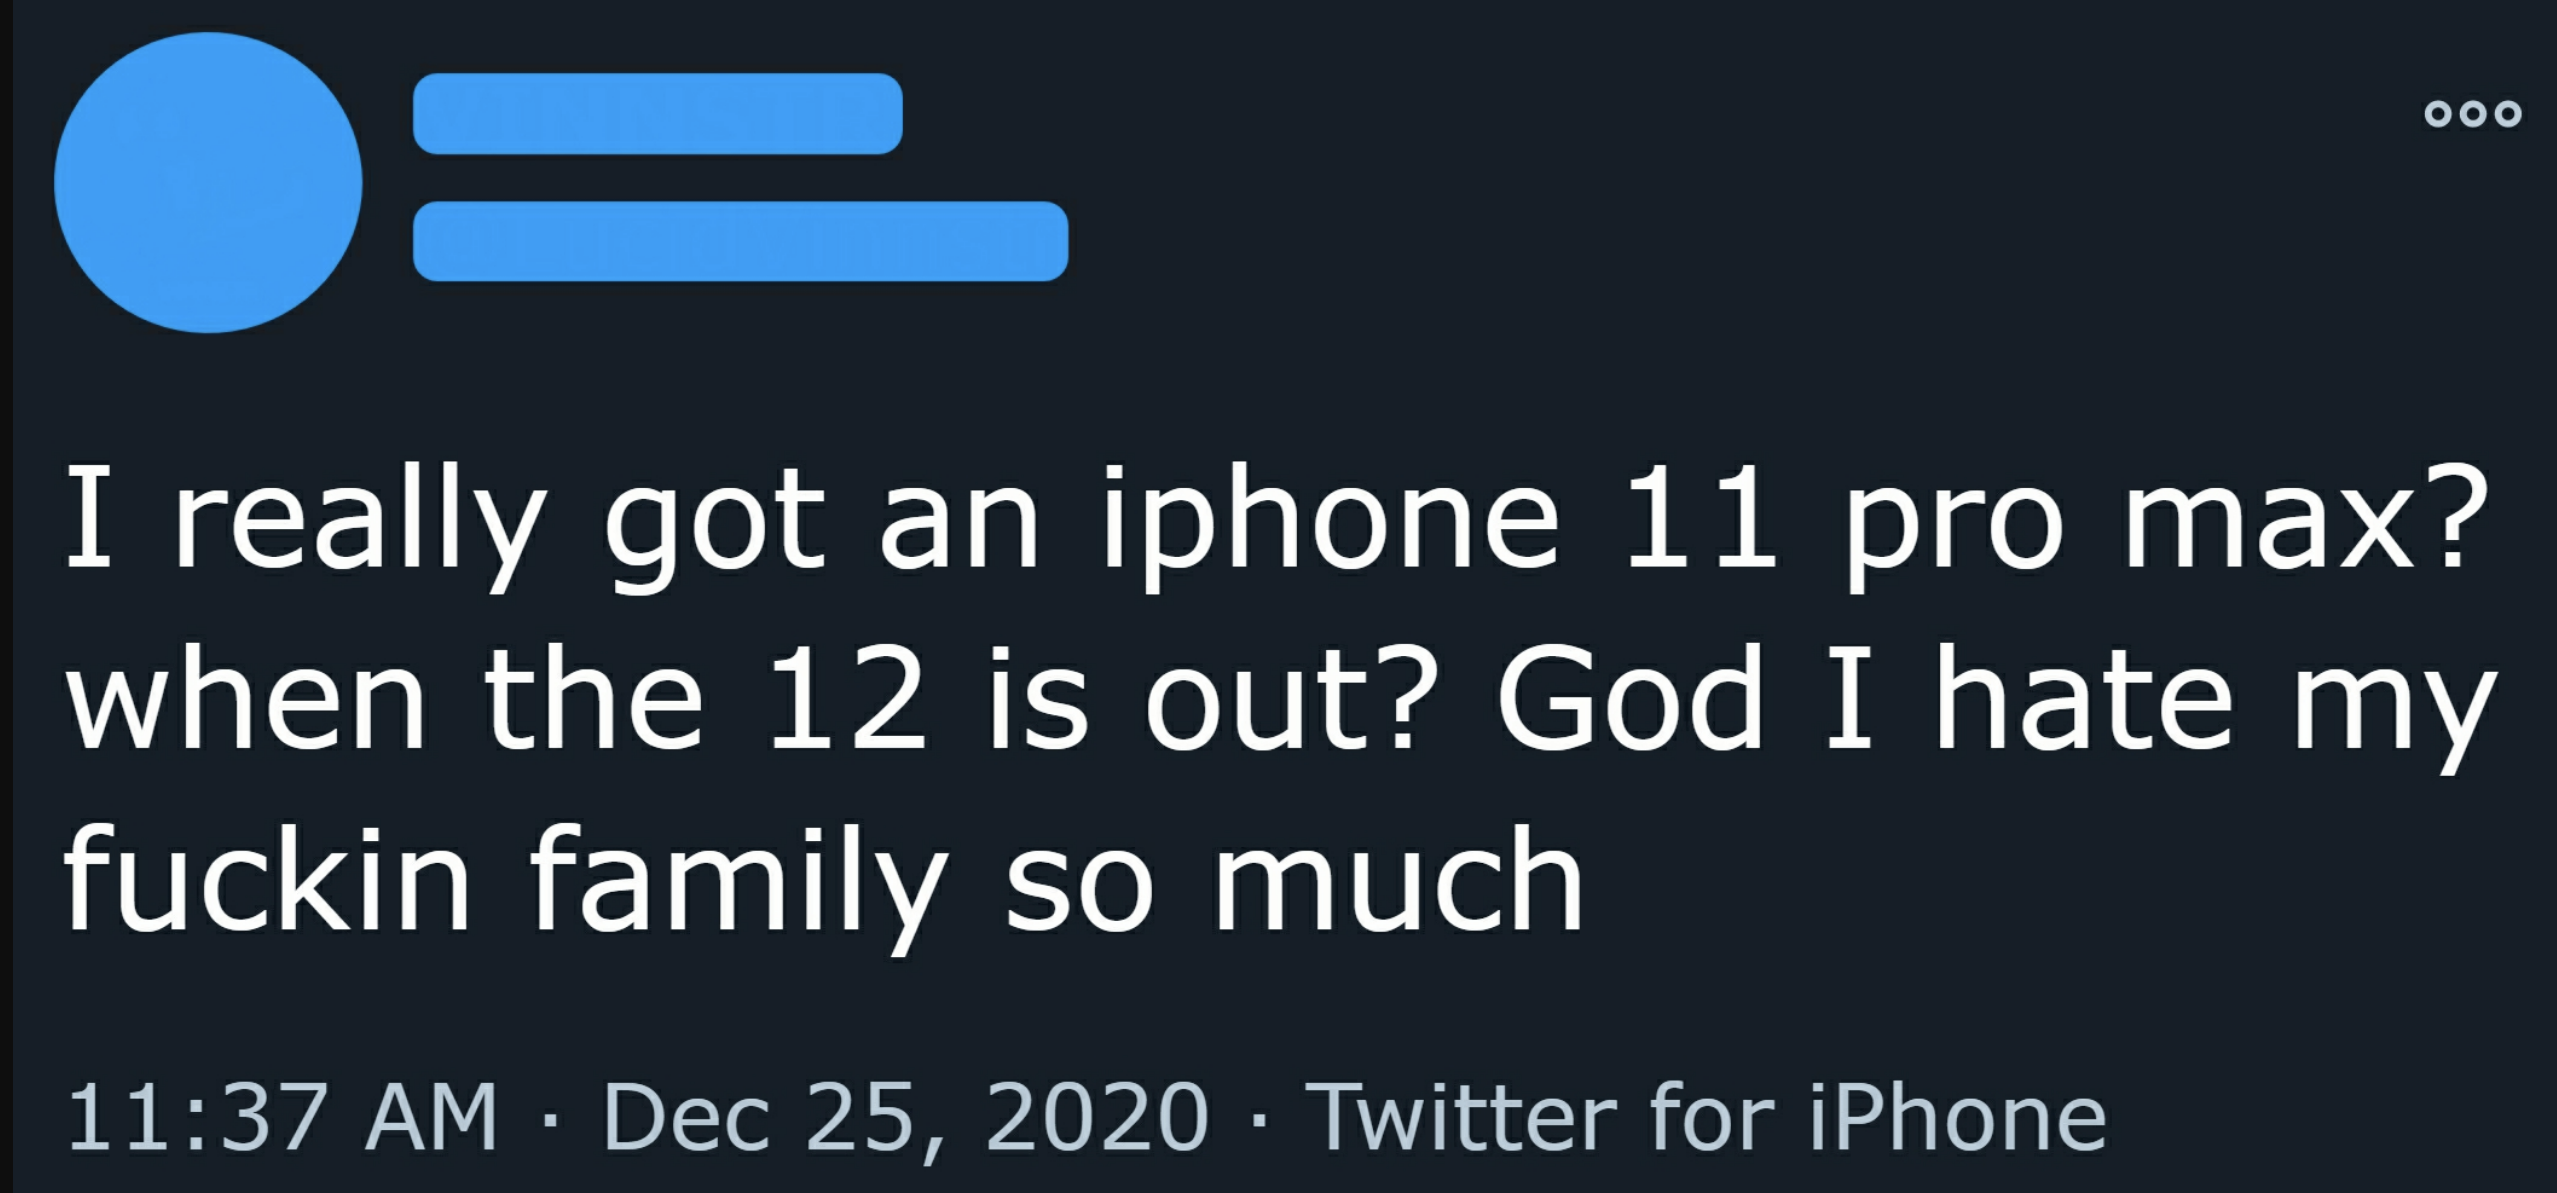 Comment: &quot;I really got an iphone 11 pro max? when the 12 is out? God I hate my fuckin family so much&quot;